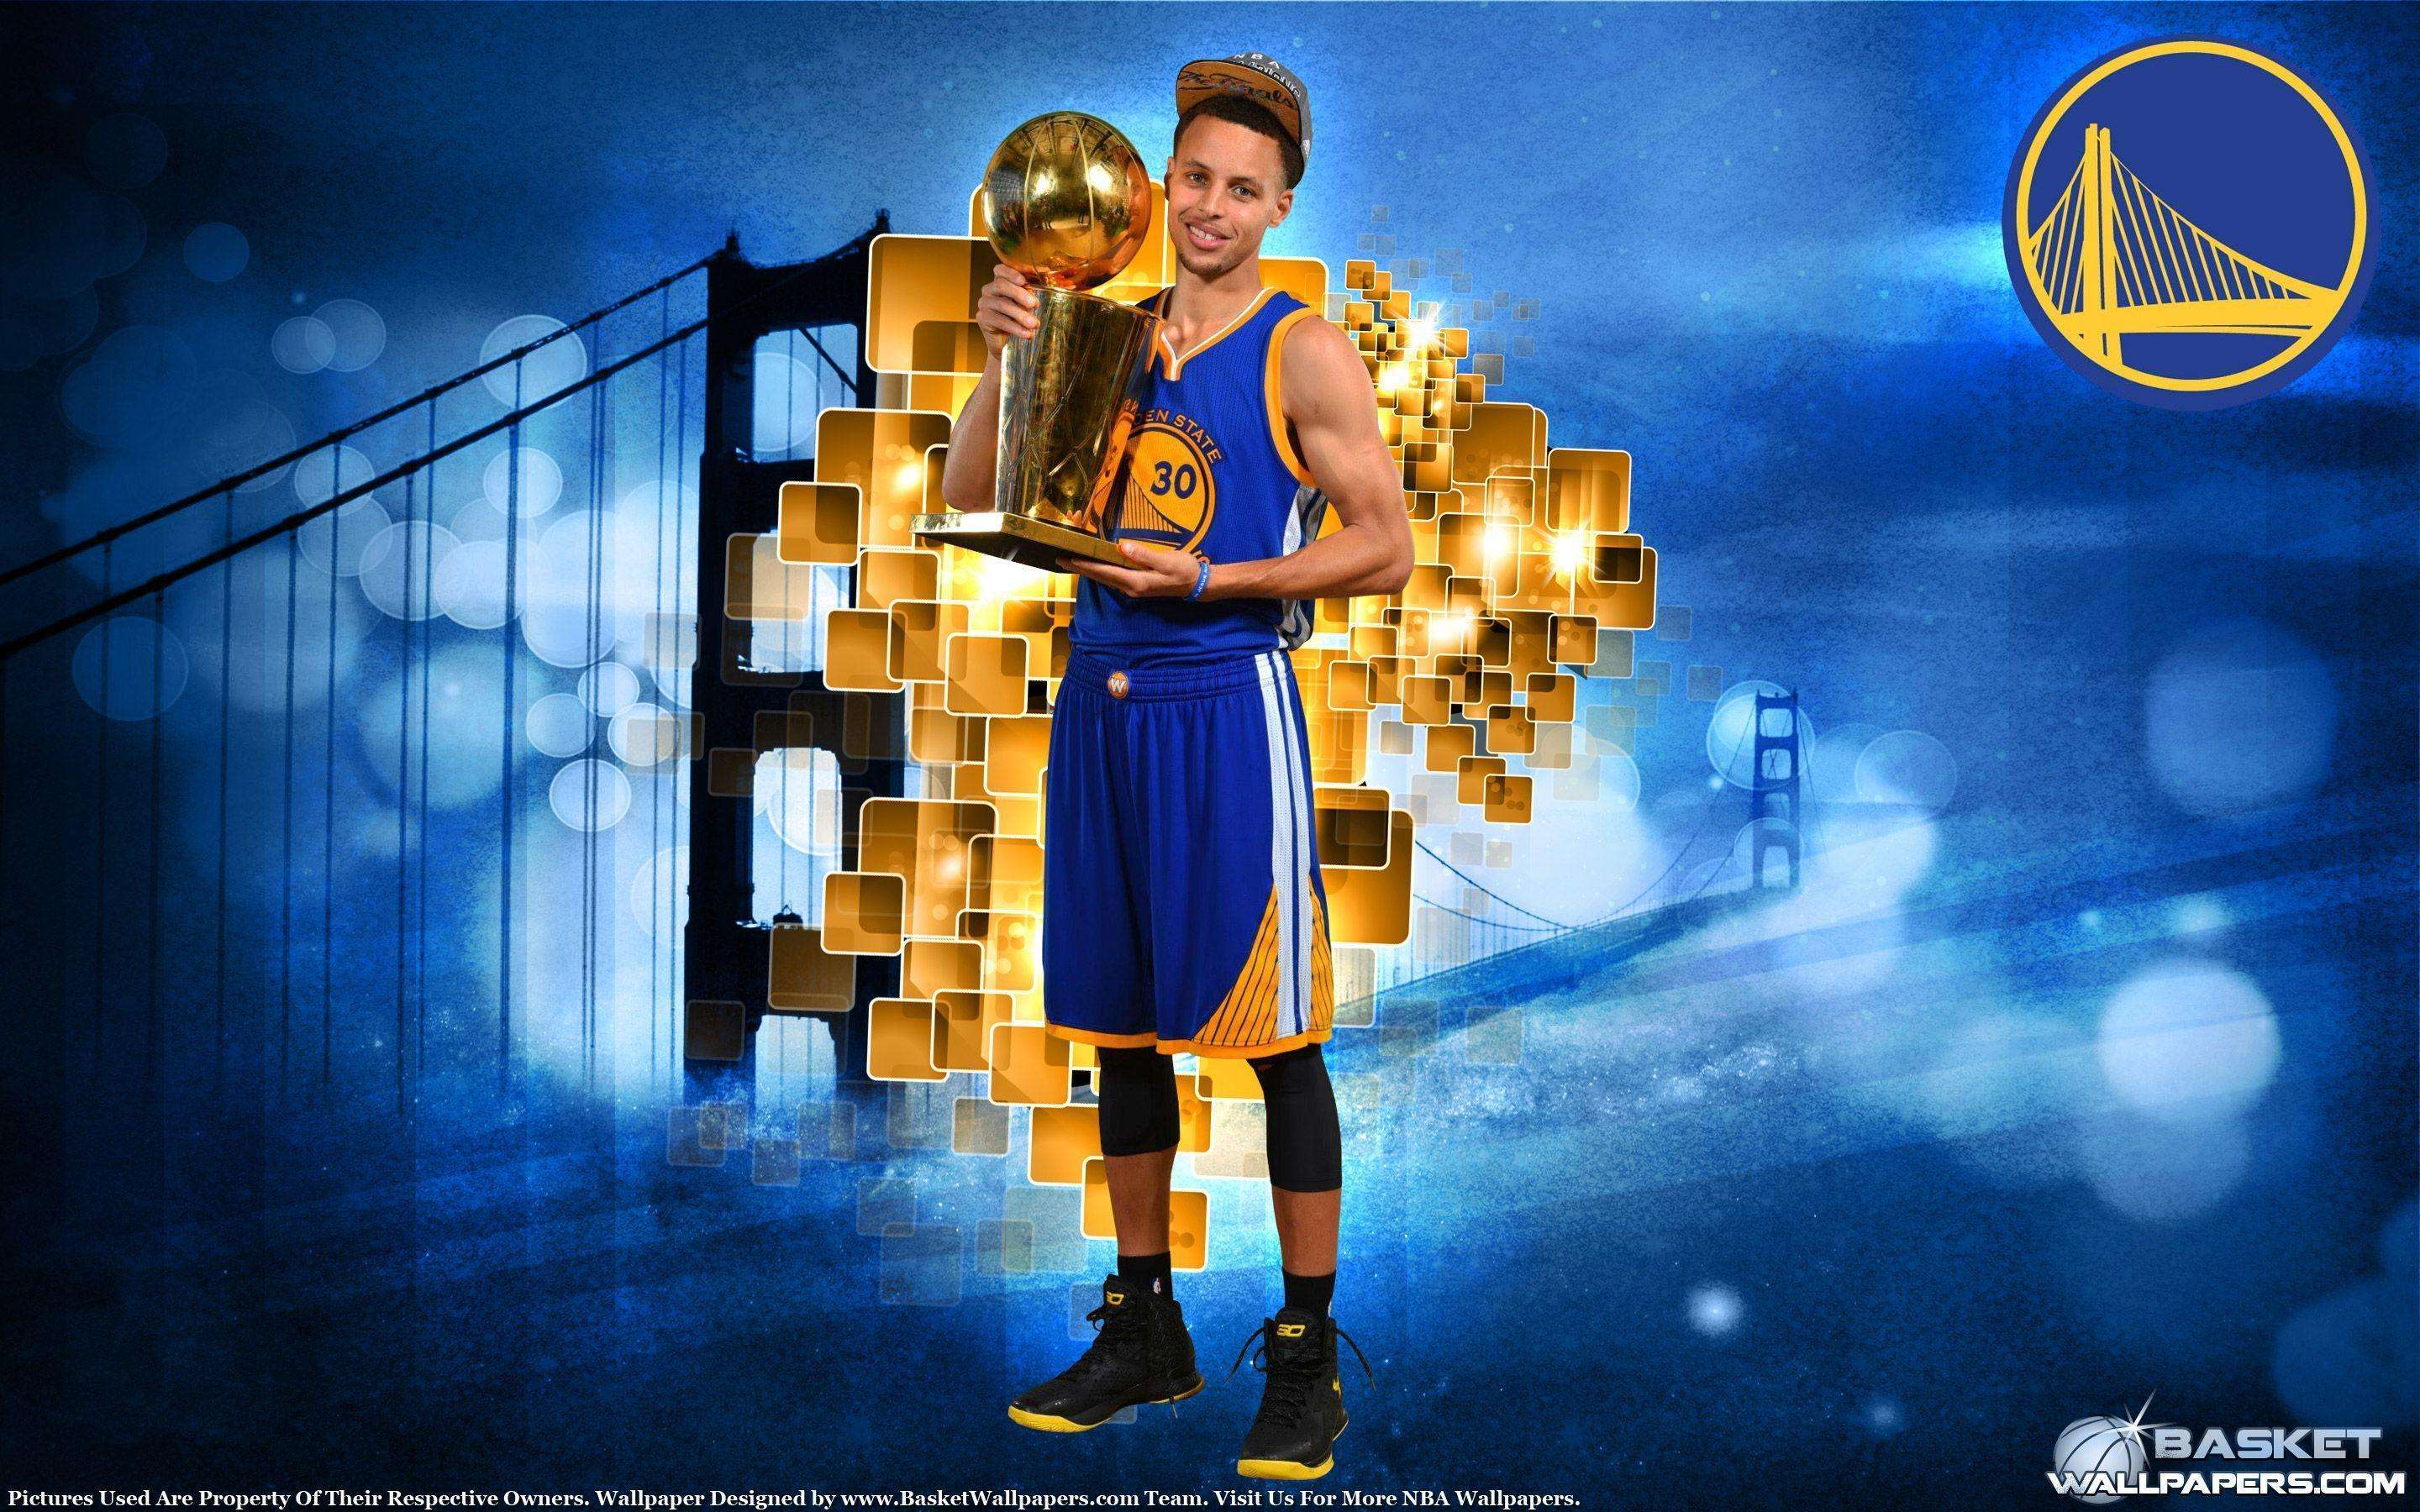 Steph Curry Wallpaper Discover more Basketball cool golden state  warriors home screen iphone wallpape  Stephen curry wallpaper Curry  wallpaper Stephen curry